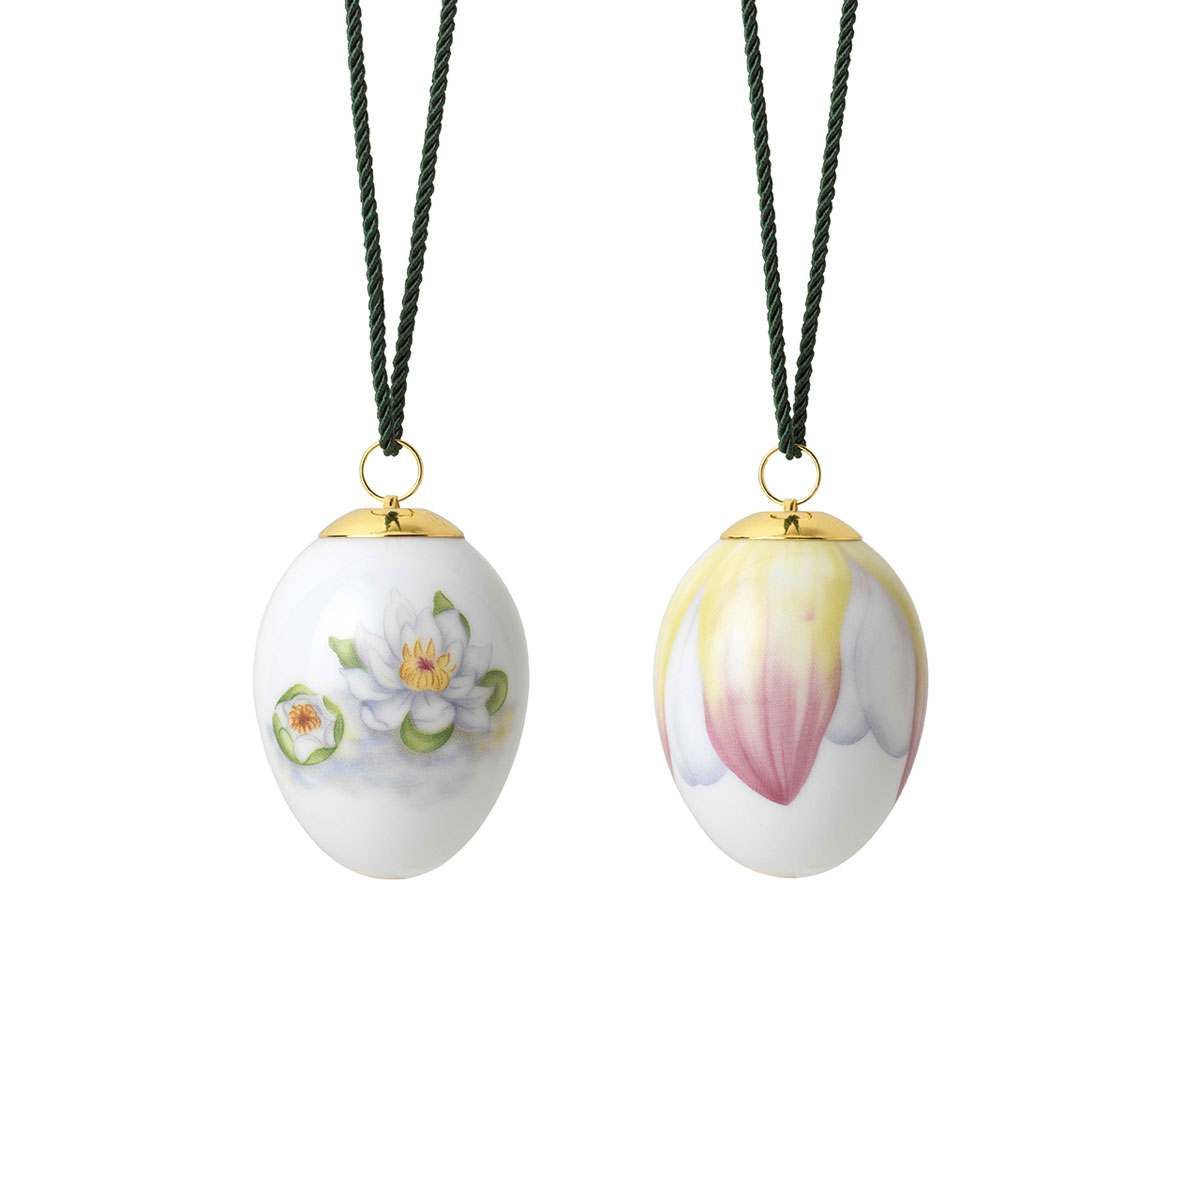 Royal Copenhagen Spring Collection Easter Egg - Water Lilly Buds And Petals Ornament, Set of 2